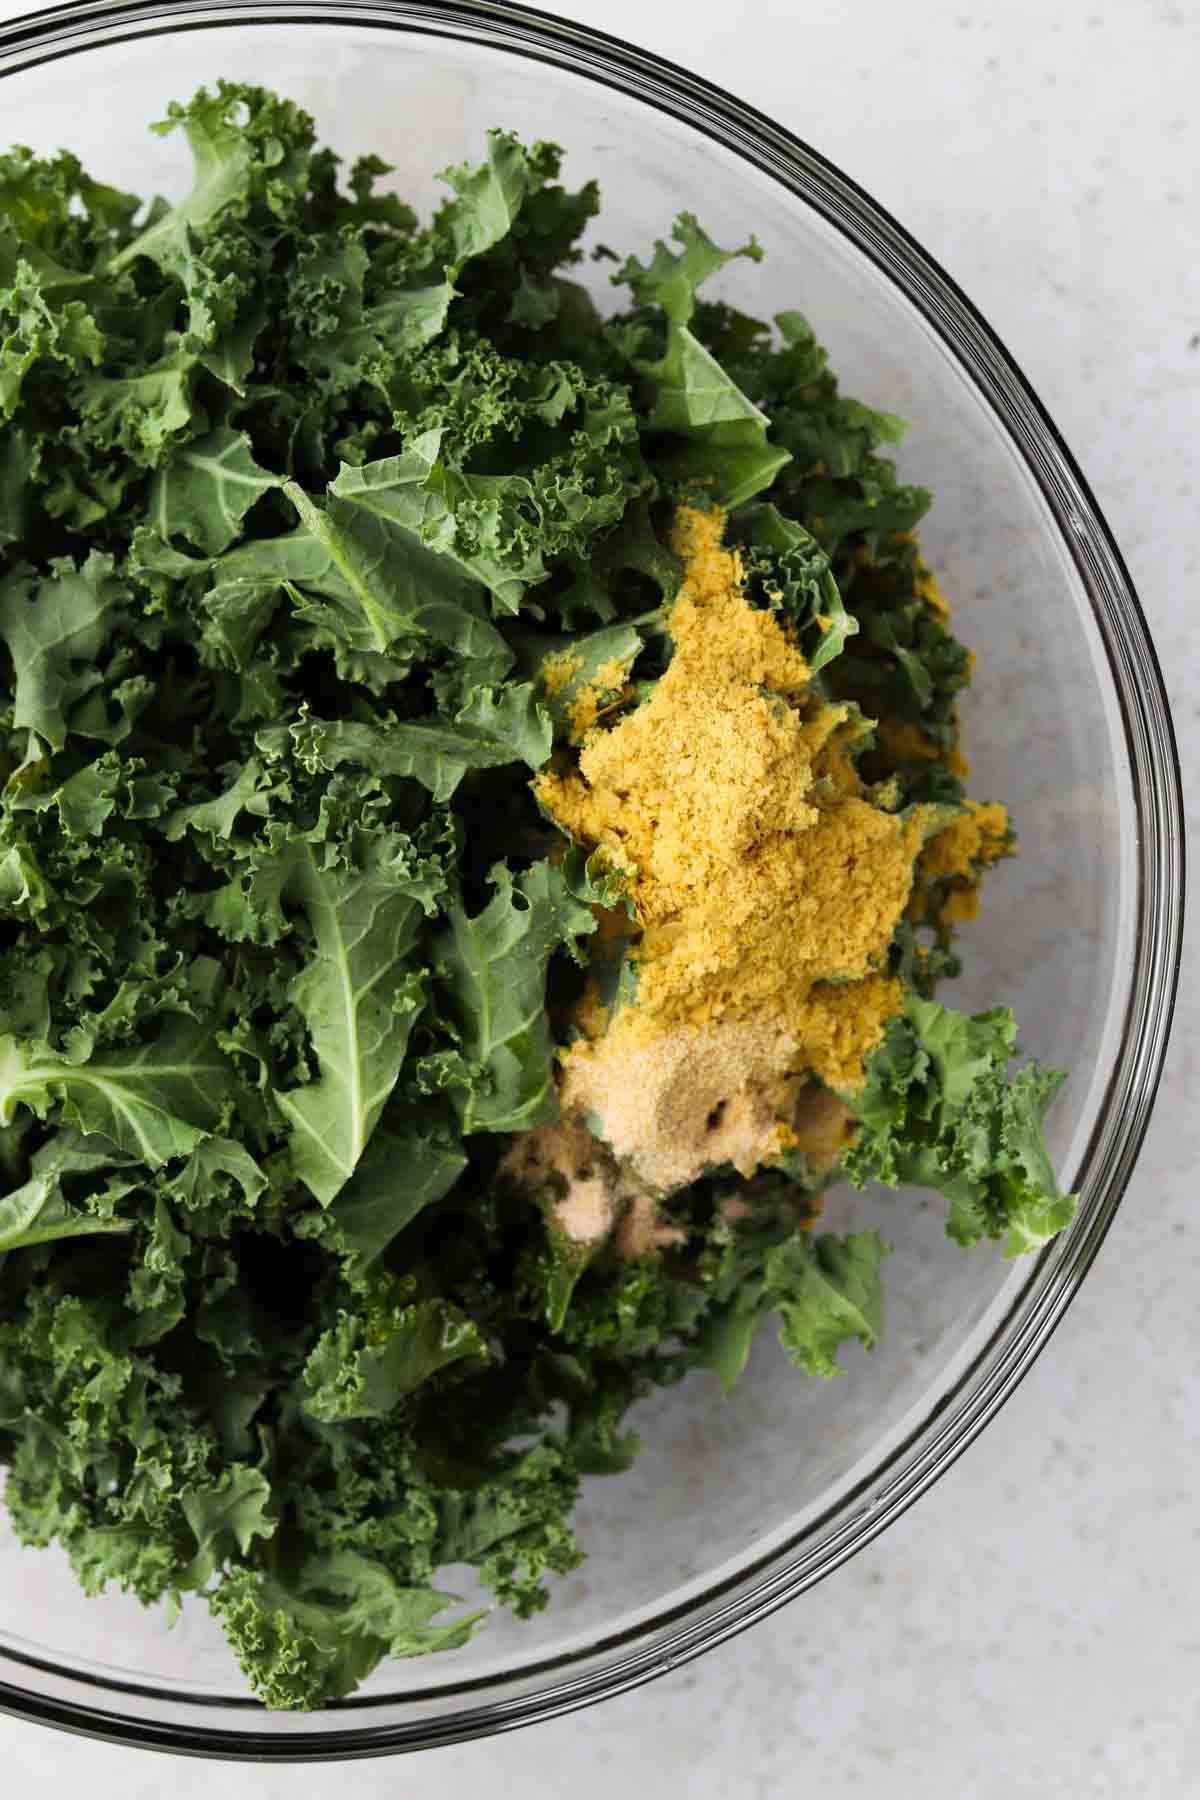 Kale, nutritional yeast, sea salt, garlic powder, and avocado oil in a glass mixing bowl.